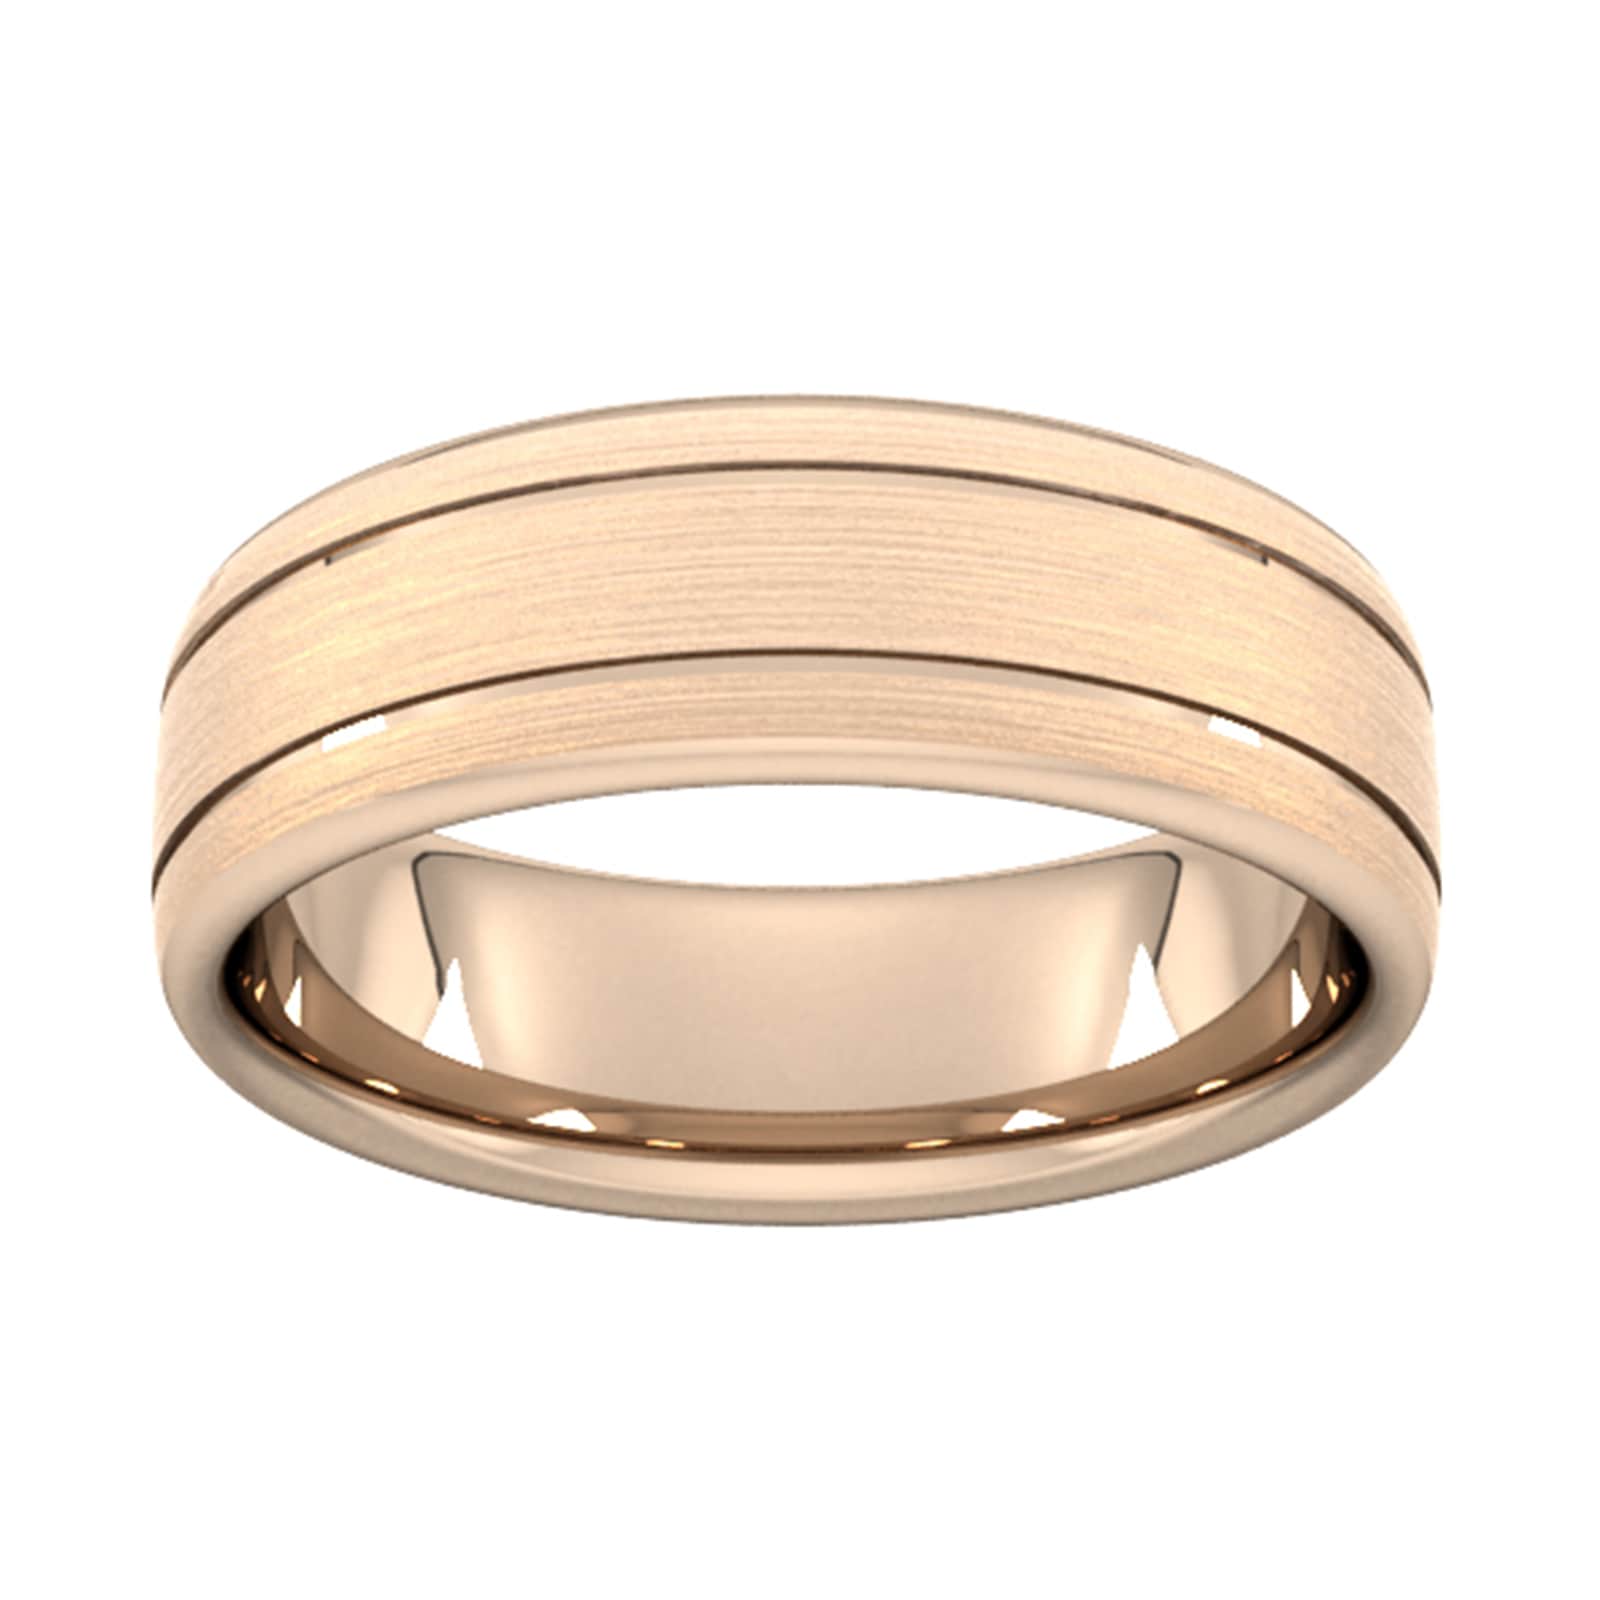 7mm Slight Court Extra Heavy Matt Finish With Double Grooves Wedding Ring In 9 Carat Rose Gold - Ring Size W